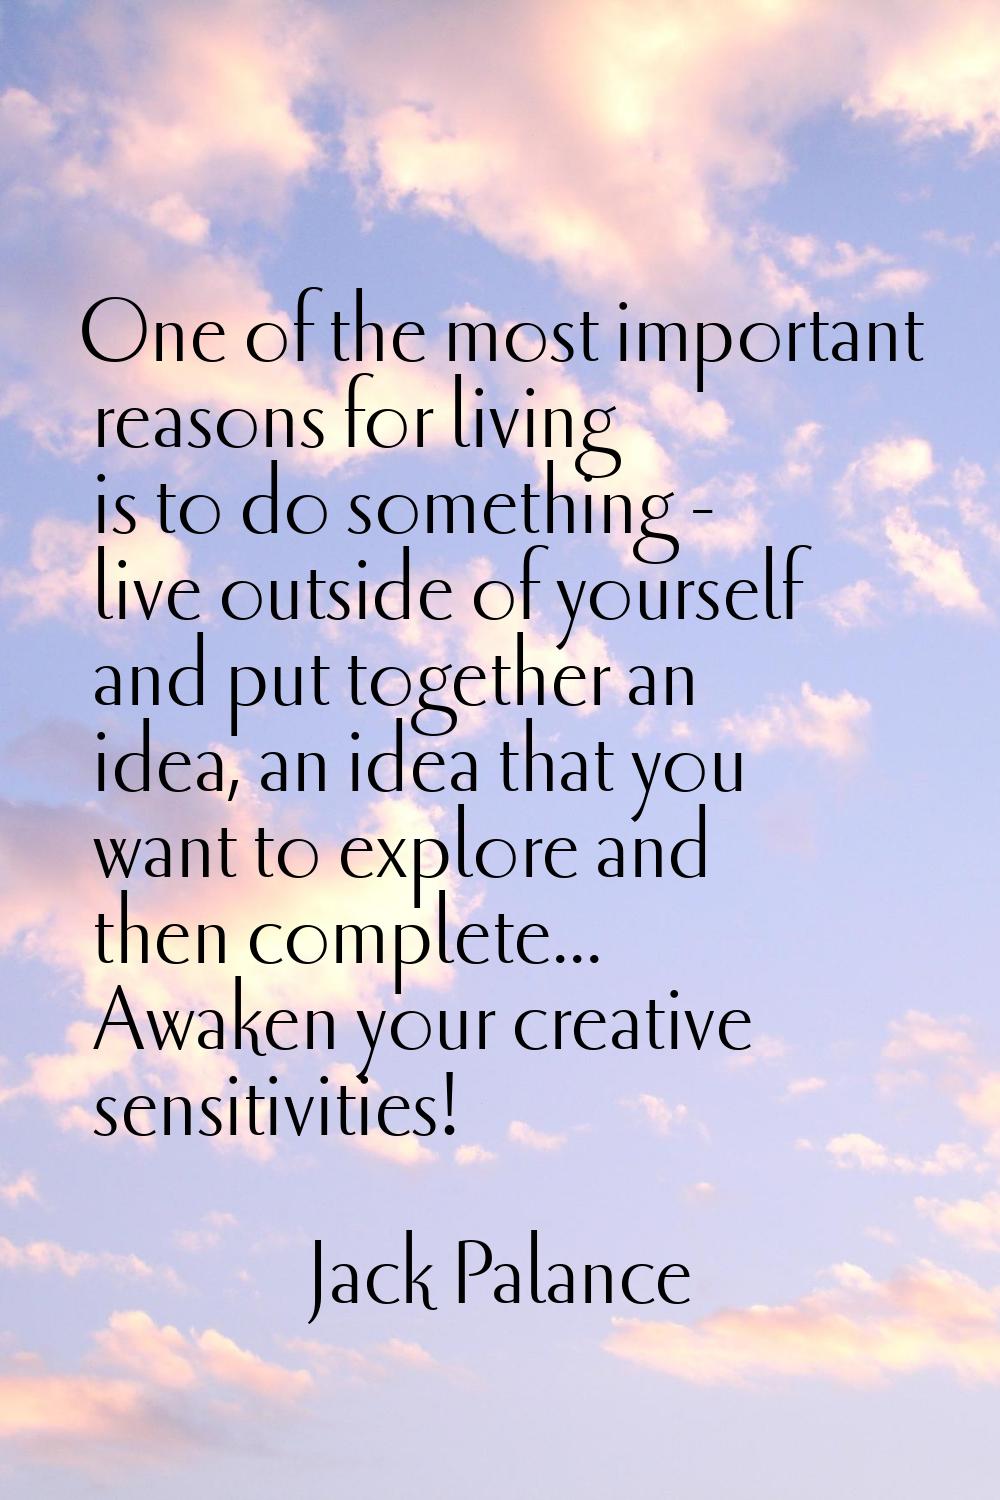 One of the most important reasons for living is to do something - live outside of yourself and put 